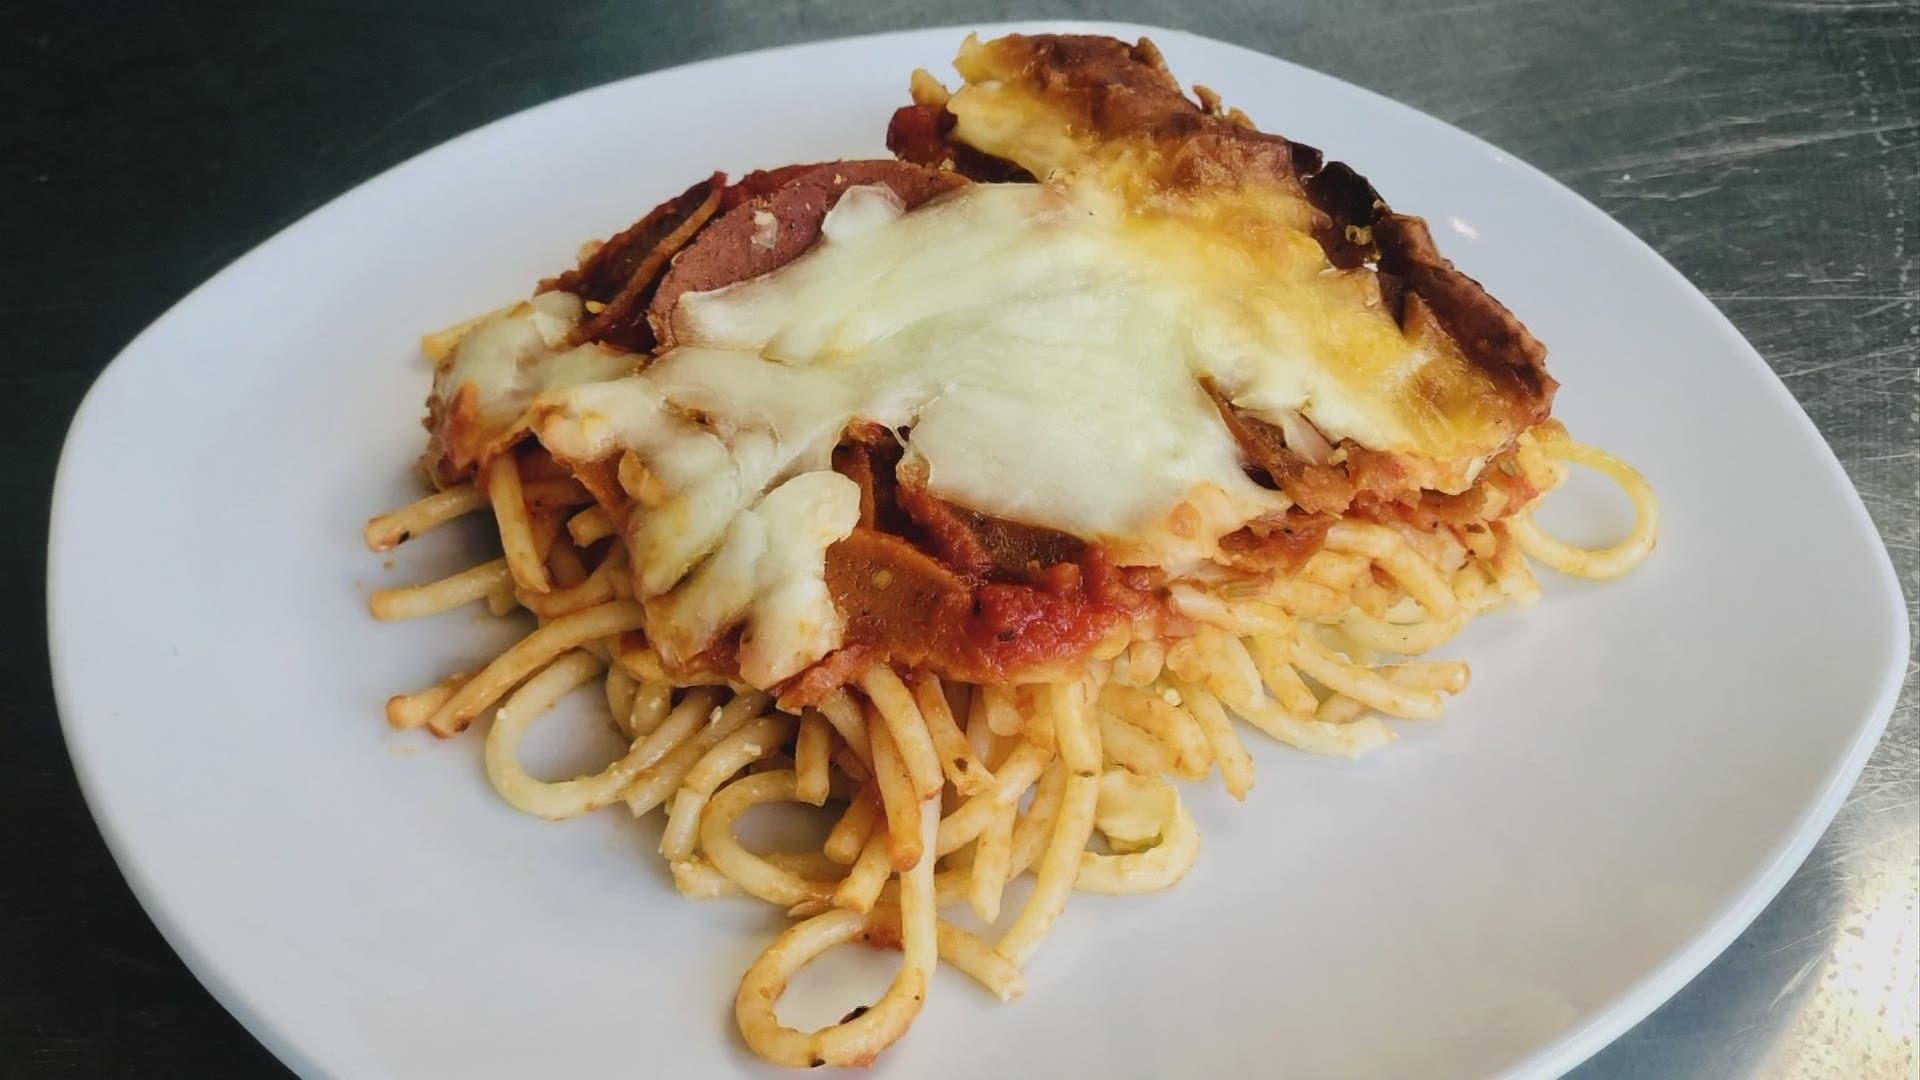 10TV's Brittany Bailey took an idea and ran with it. On this week's Brittany's Bites, it's spaghetti and pizza in one recipe.